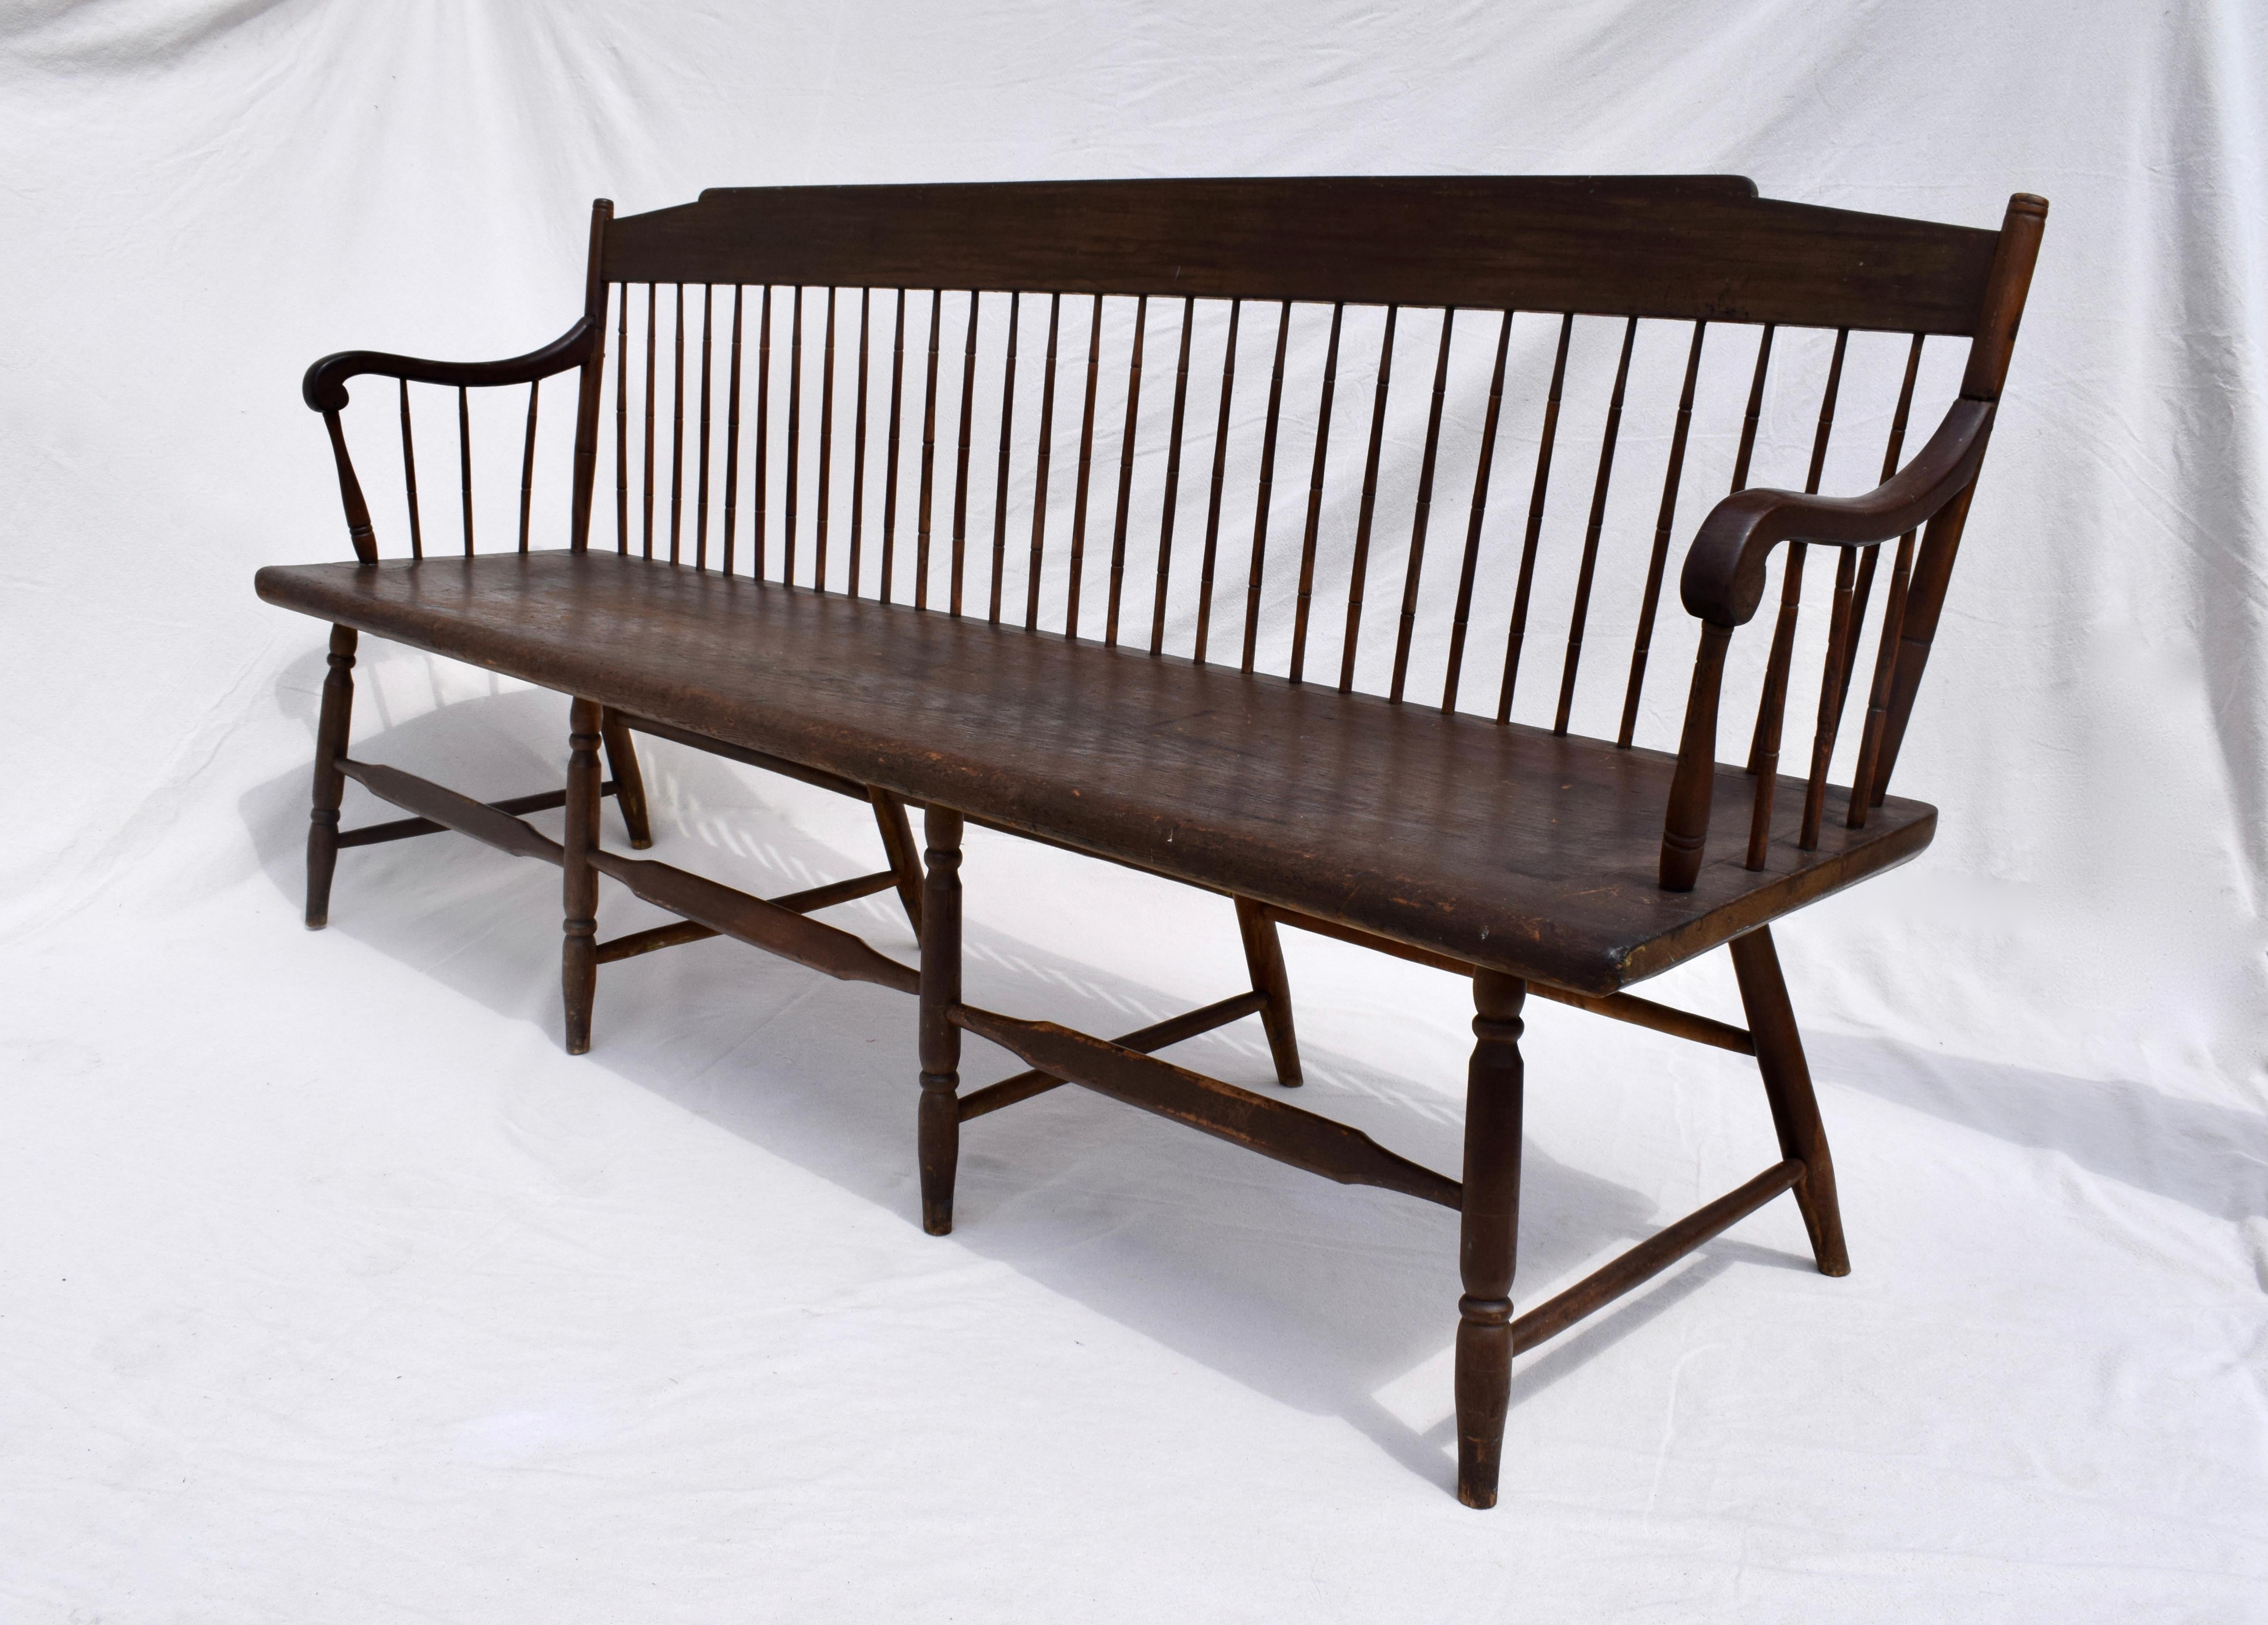 Woven American Windsor Bench Early 19th C.